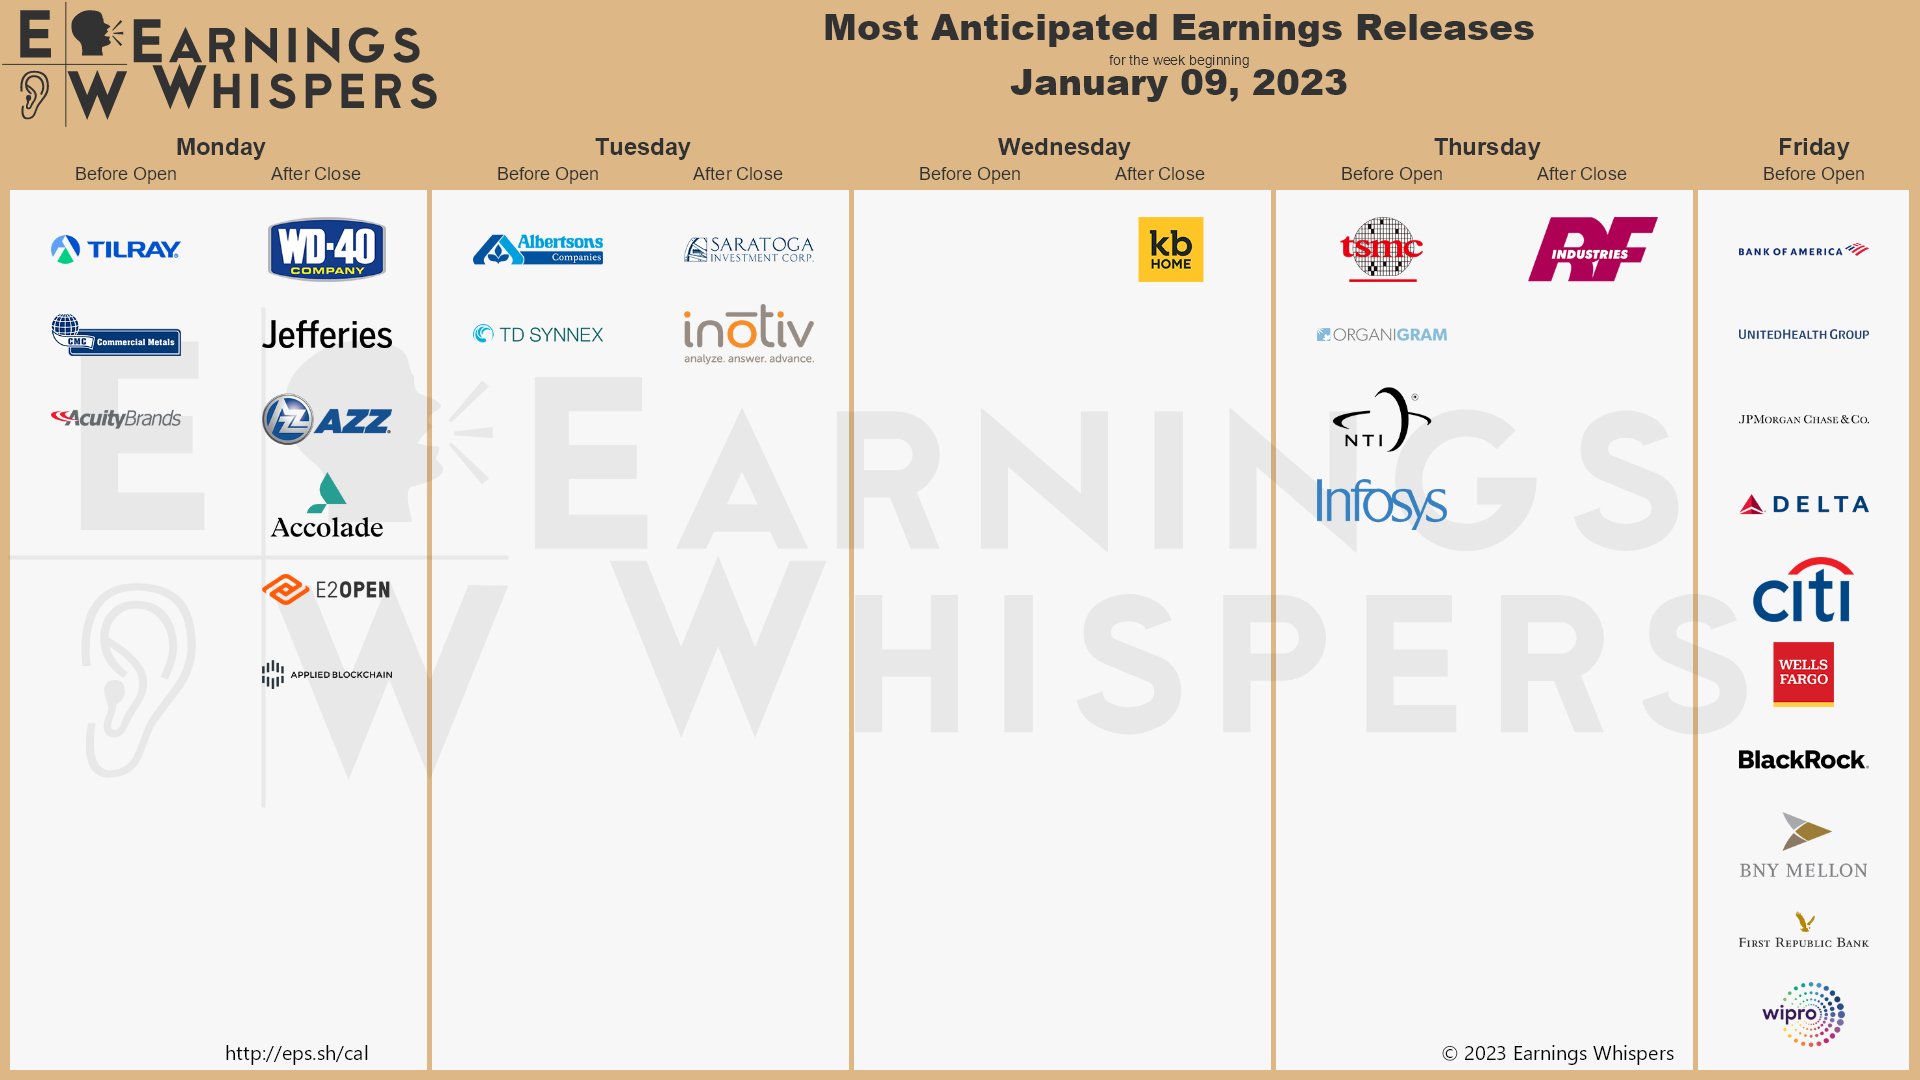 The most anticipated earnings releases scheduled for the week are Tilray #TLRY, Bank of America #BAC, UnitedHealth Group #UNH, JPMorgan Chase #JPM, Delta Air Lines #DAL, Commercial Metals #CMC, Wells Fargo #WFC, Citigroup #C, Acuity Brands #AYI, and Taiwan Semiconductor Manufacturing (TSMC) #TSM